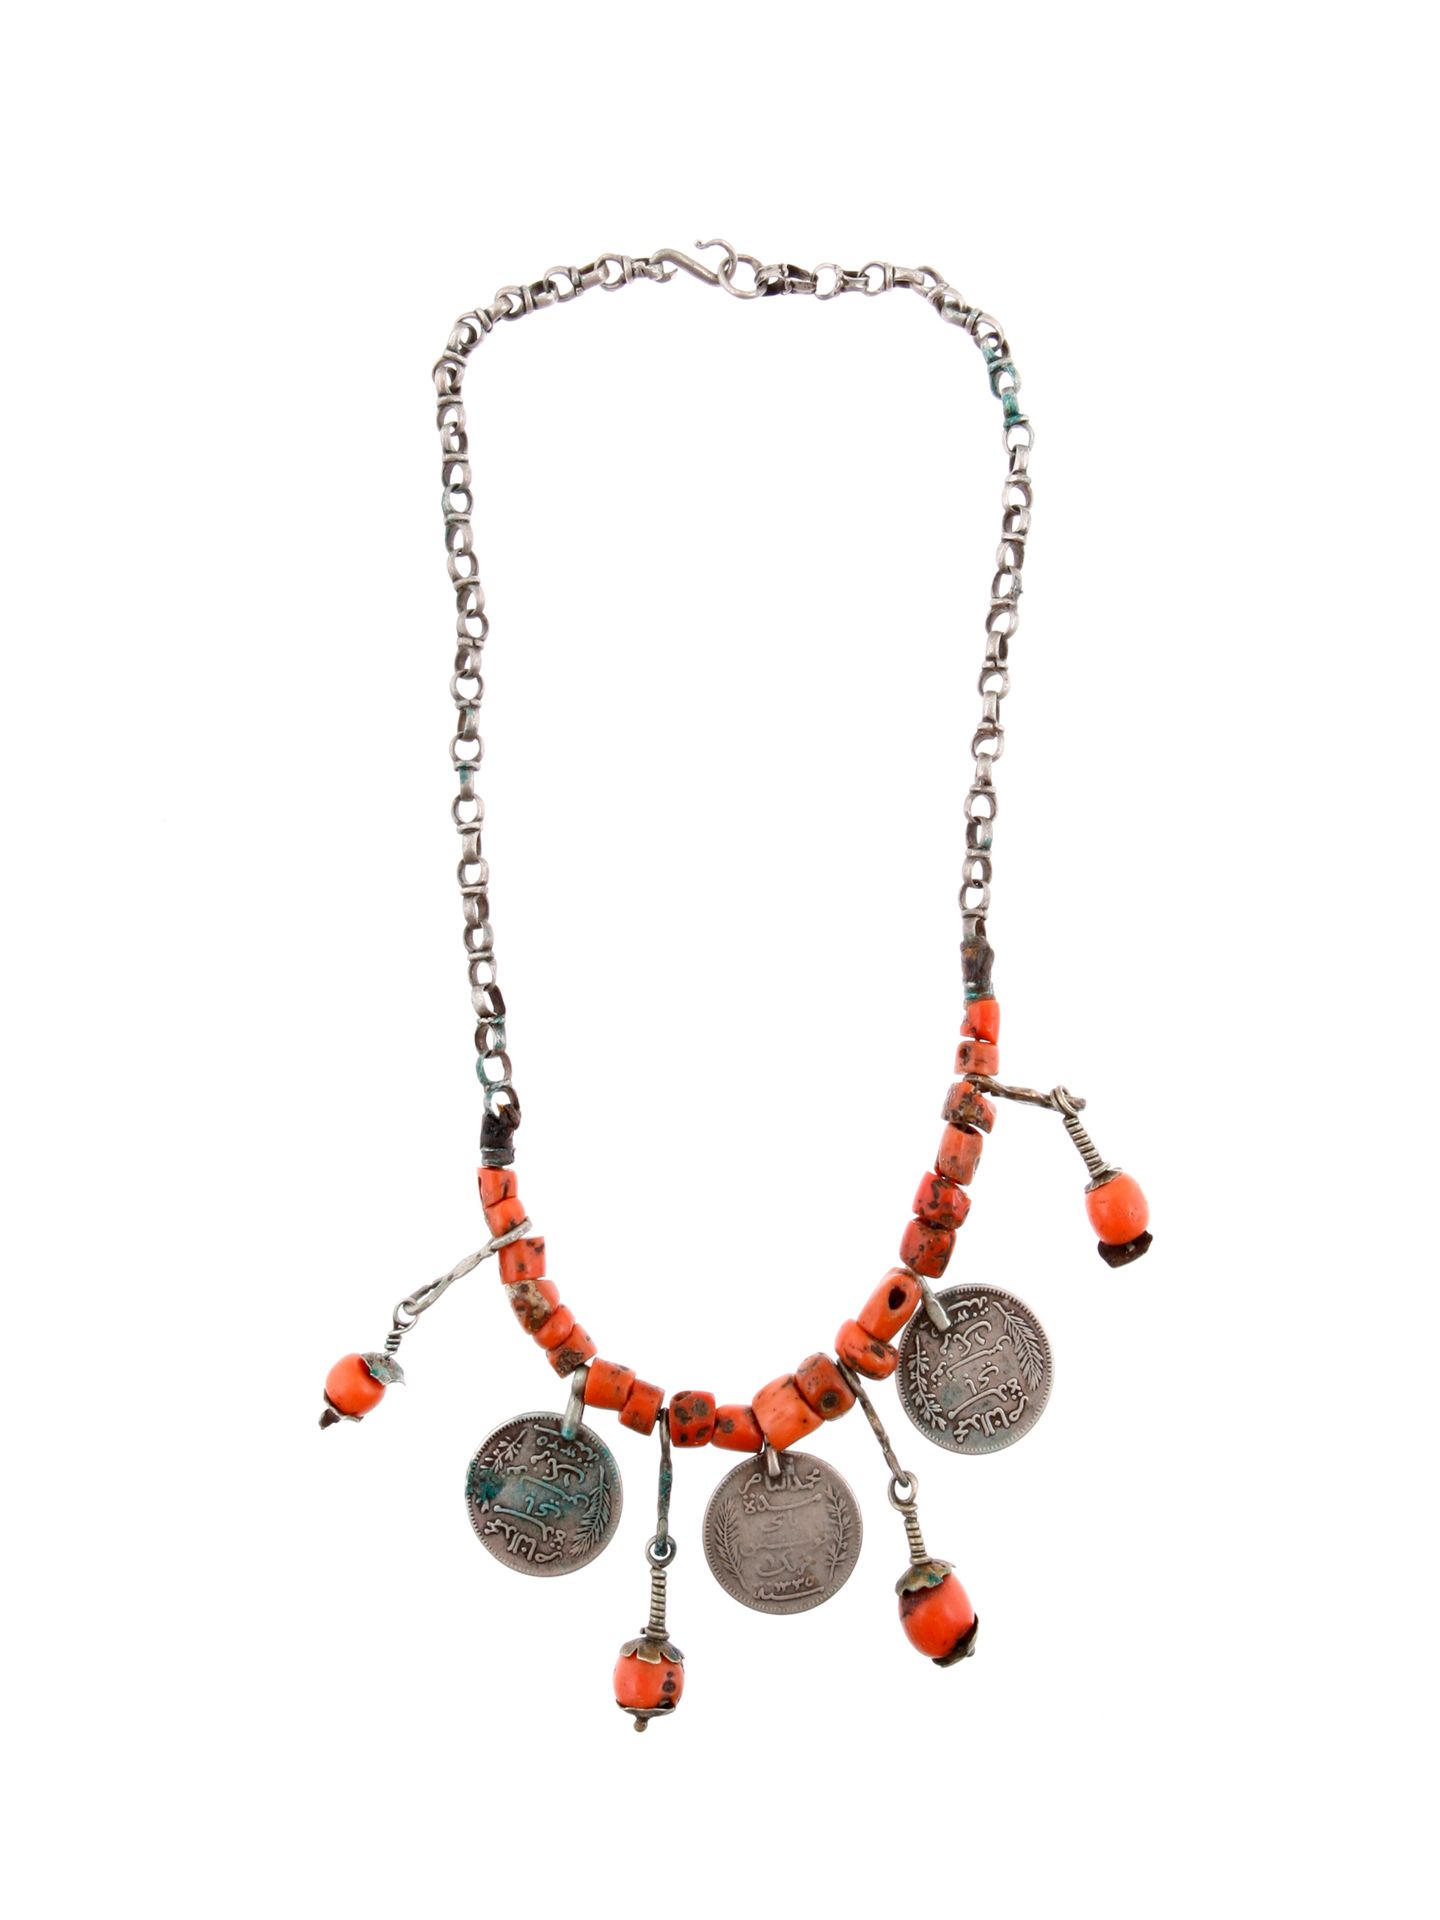 A Berber Necklace with seven Pendants Necklace with seven jewelry pendants

Berb&hellip;